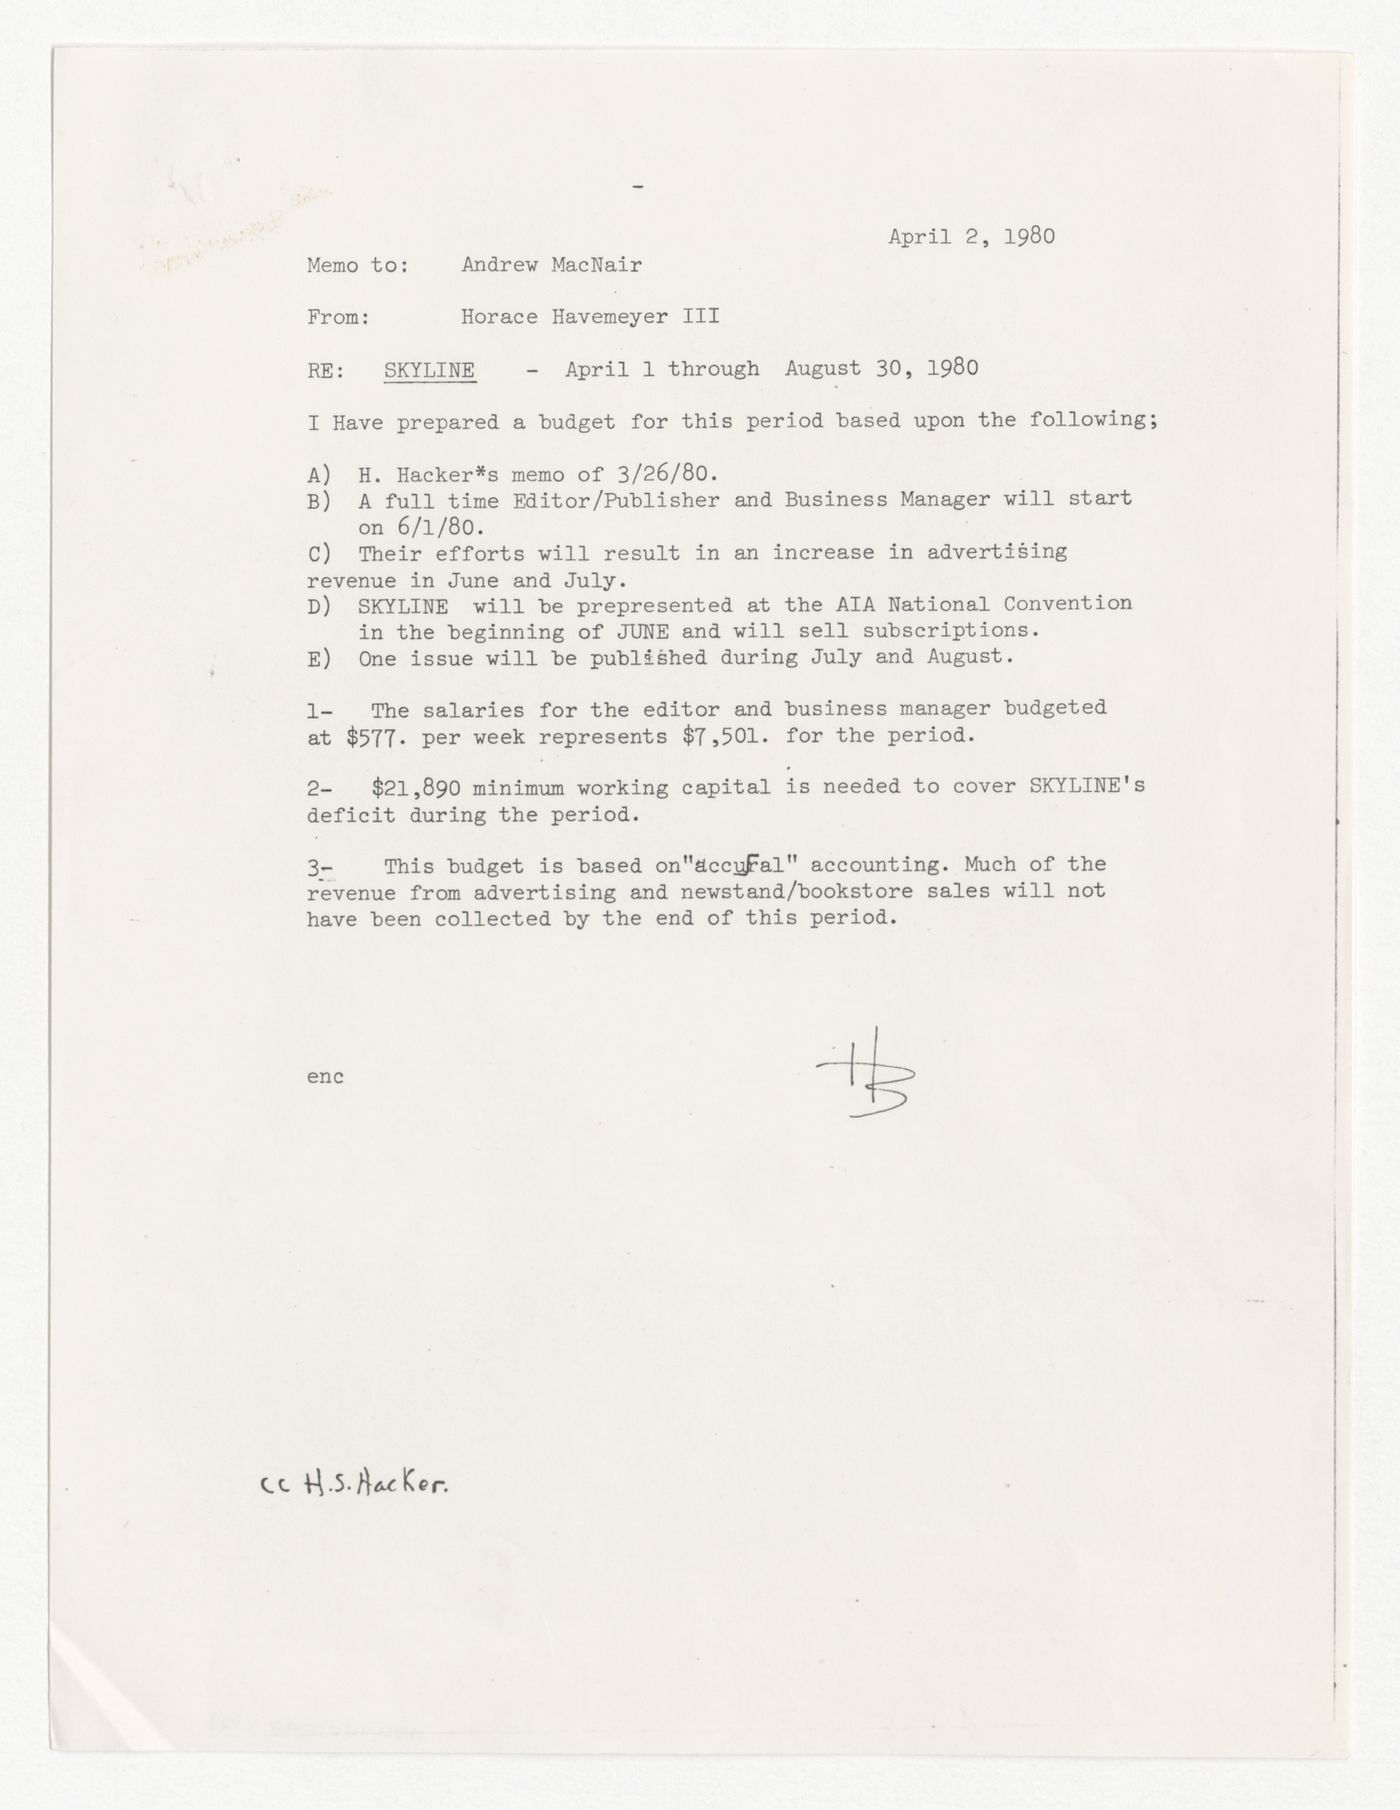 Memorandum from Horace Havemeyer III to Andrew MacNair with attached budget for Skyline from April to August 1980